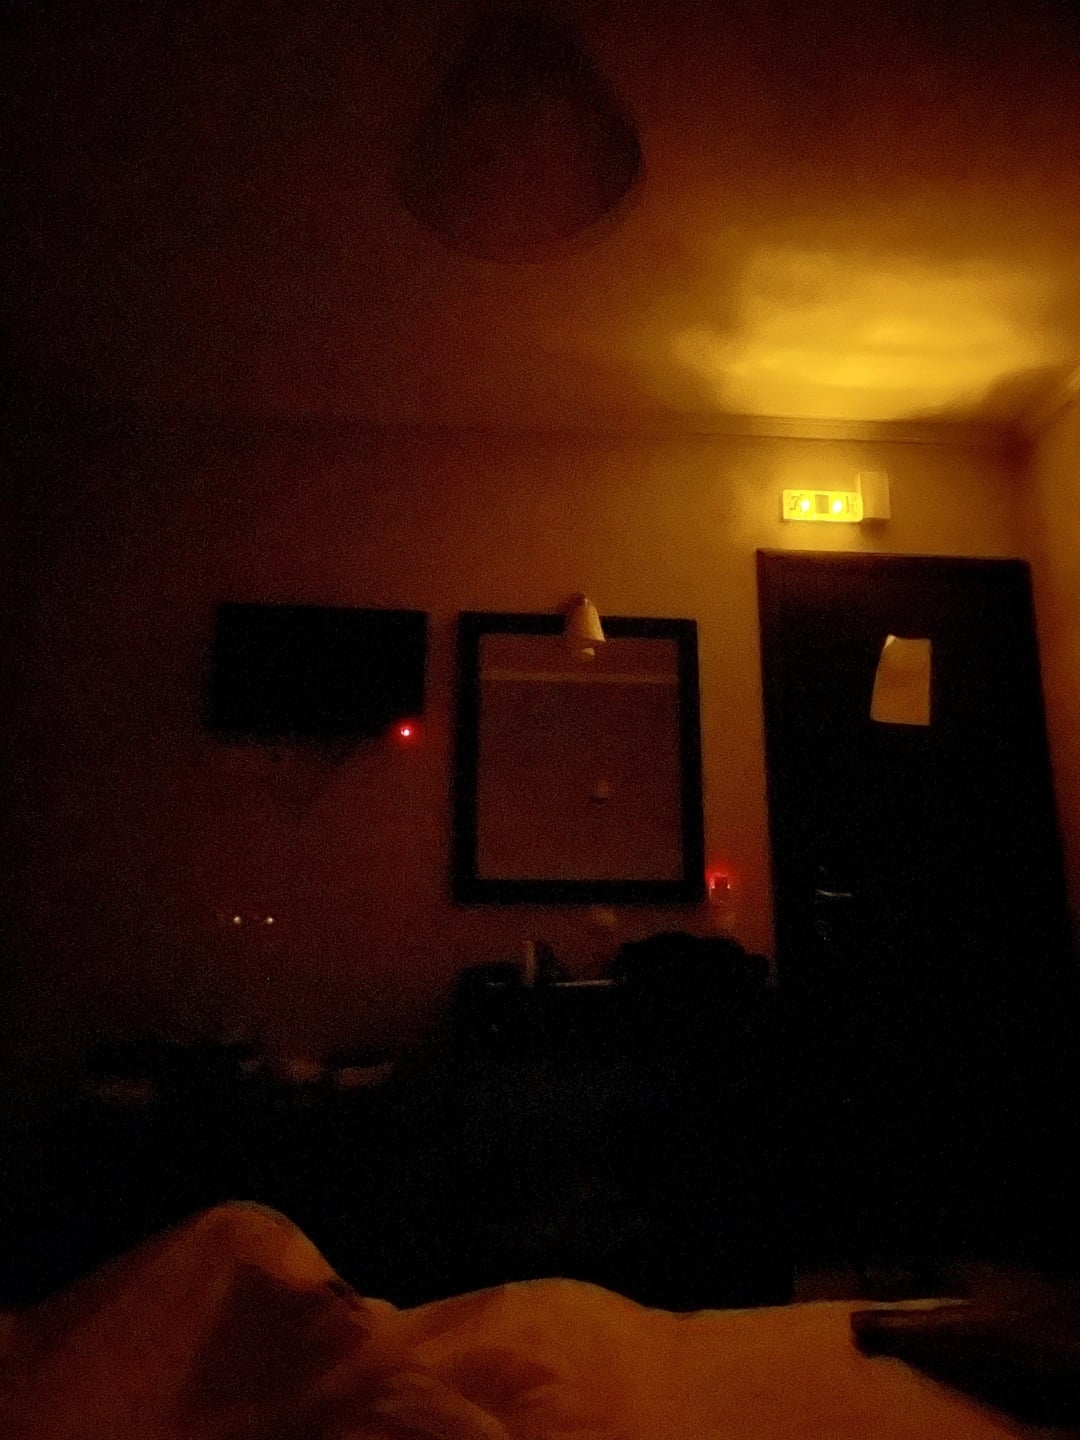 A dark room with faint illumination near the ceiling and a barely visible door